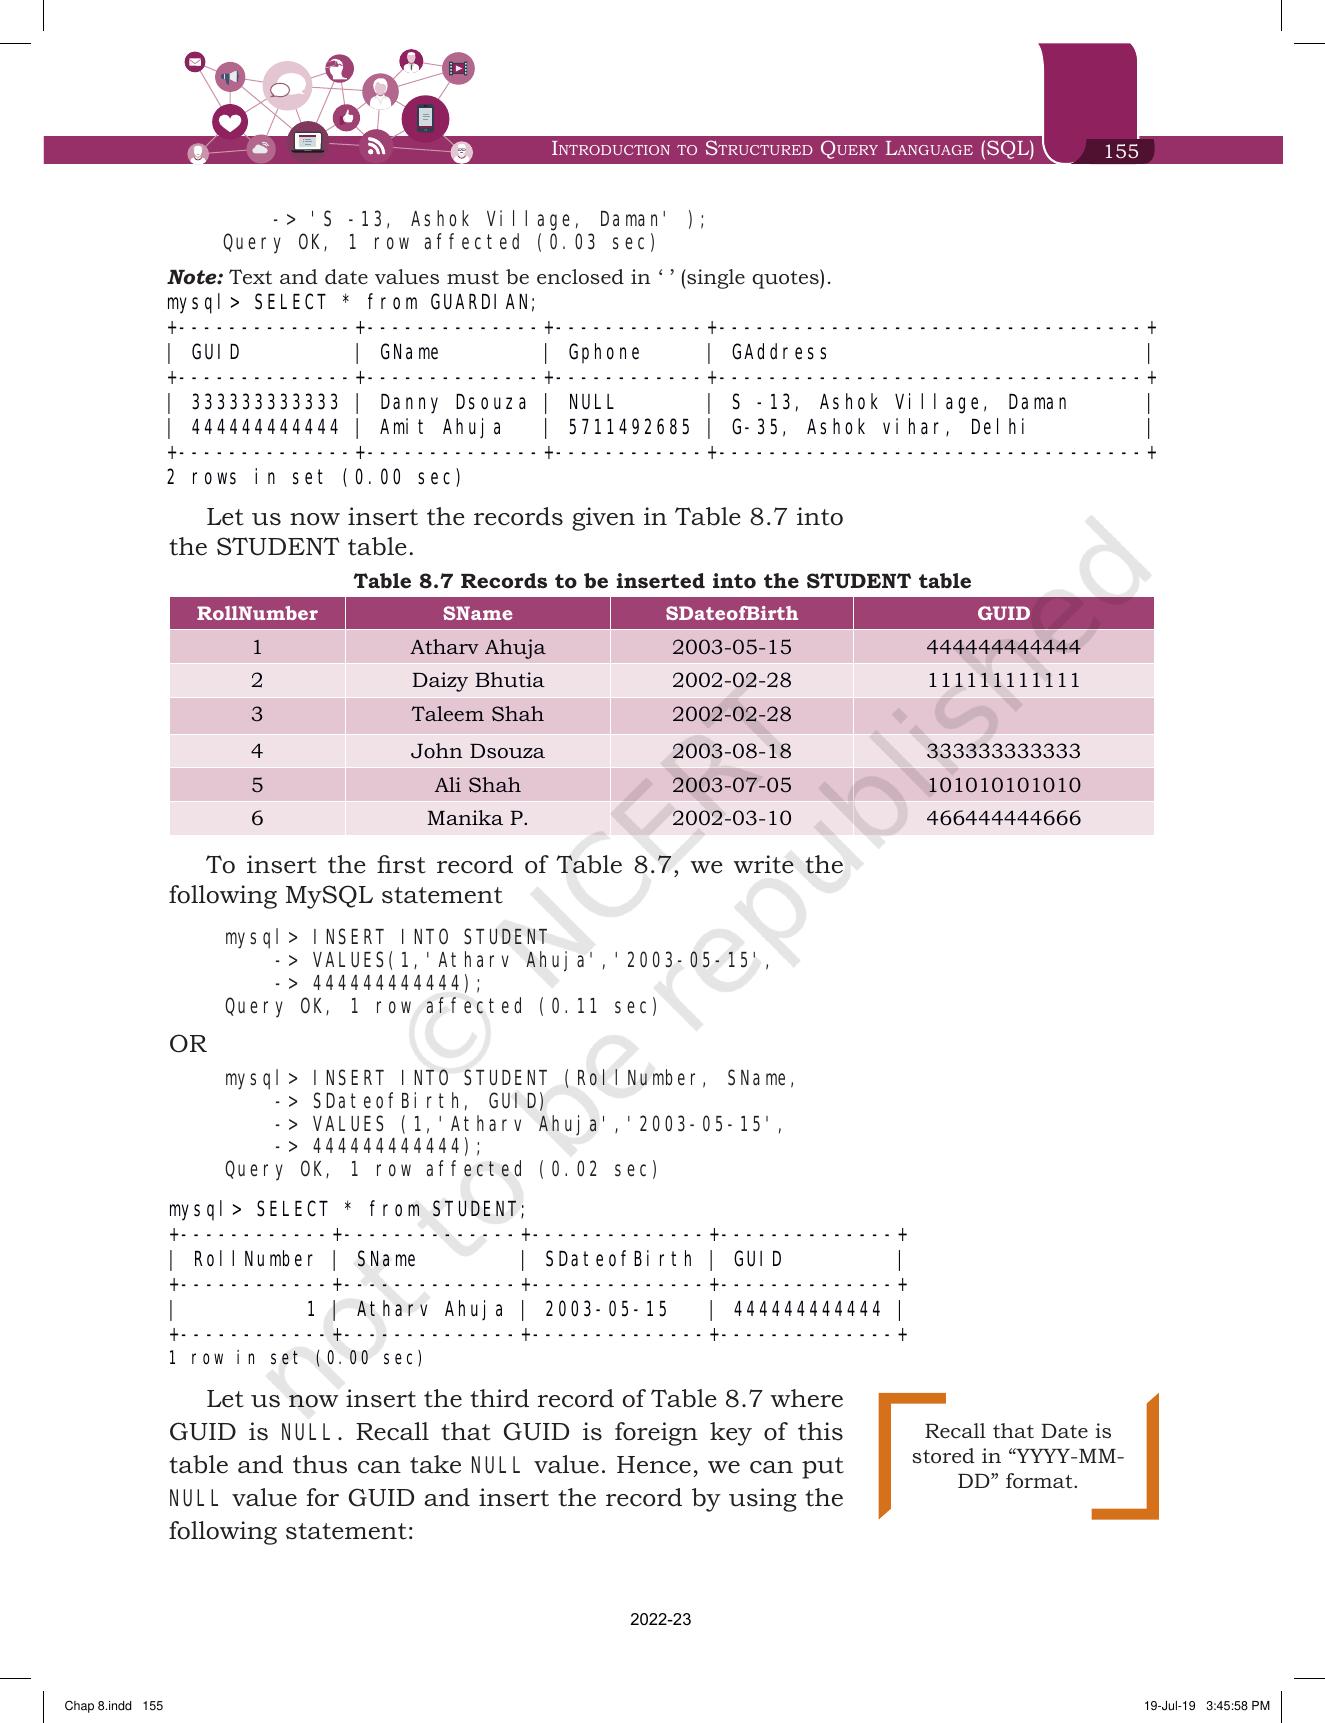 NCERT Book for Class 11 Informatics Practices Chapter 8 Introduction to Structured Query Language (SQL) - Page 13